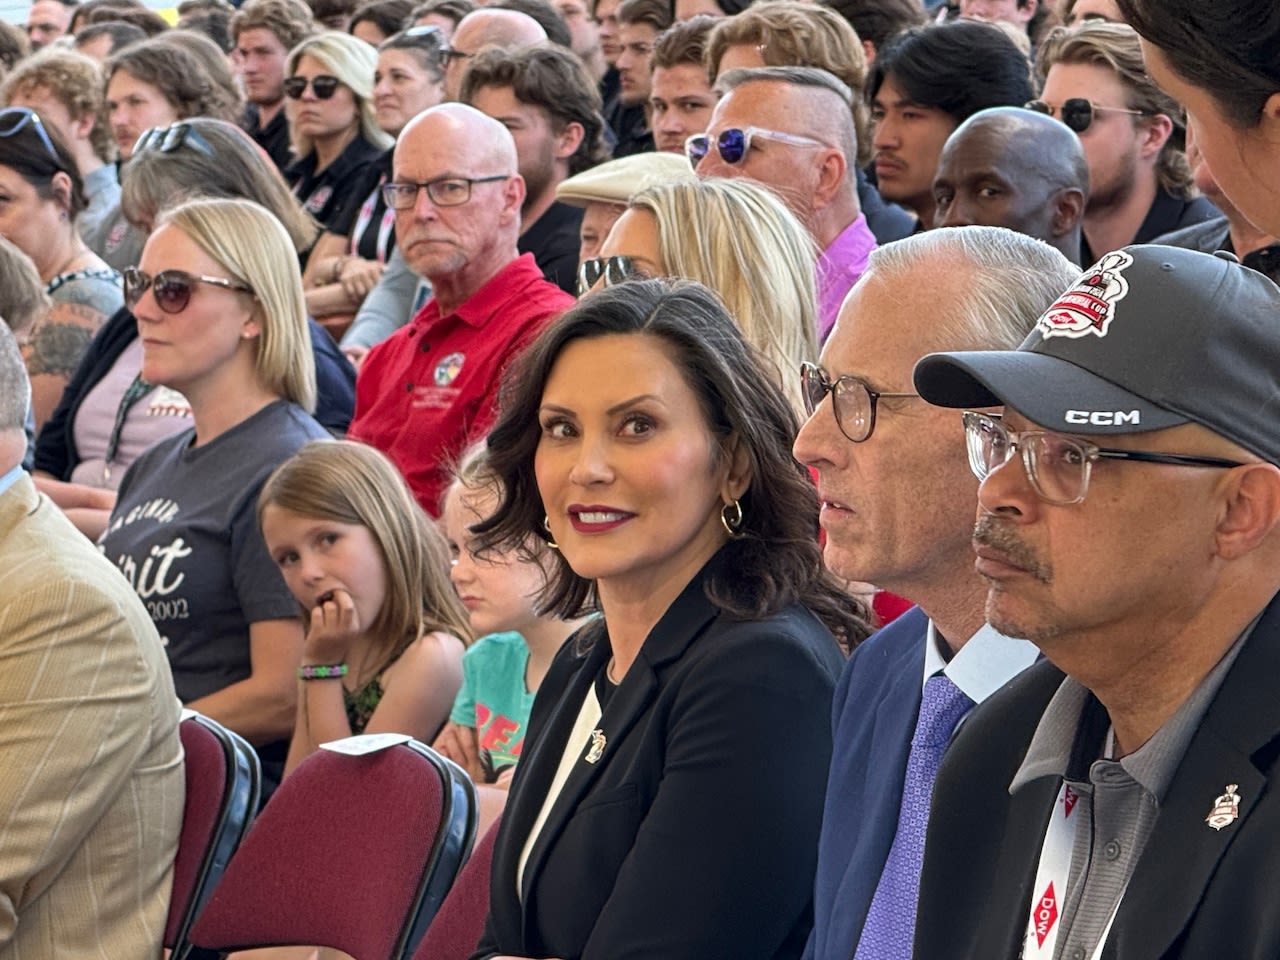 Gov. Whitmer surprises Saginaw crowd at Memorial Cup opening ceremony